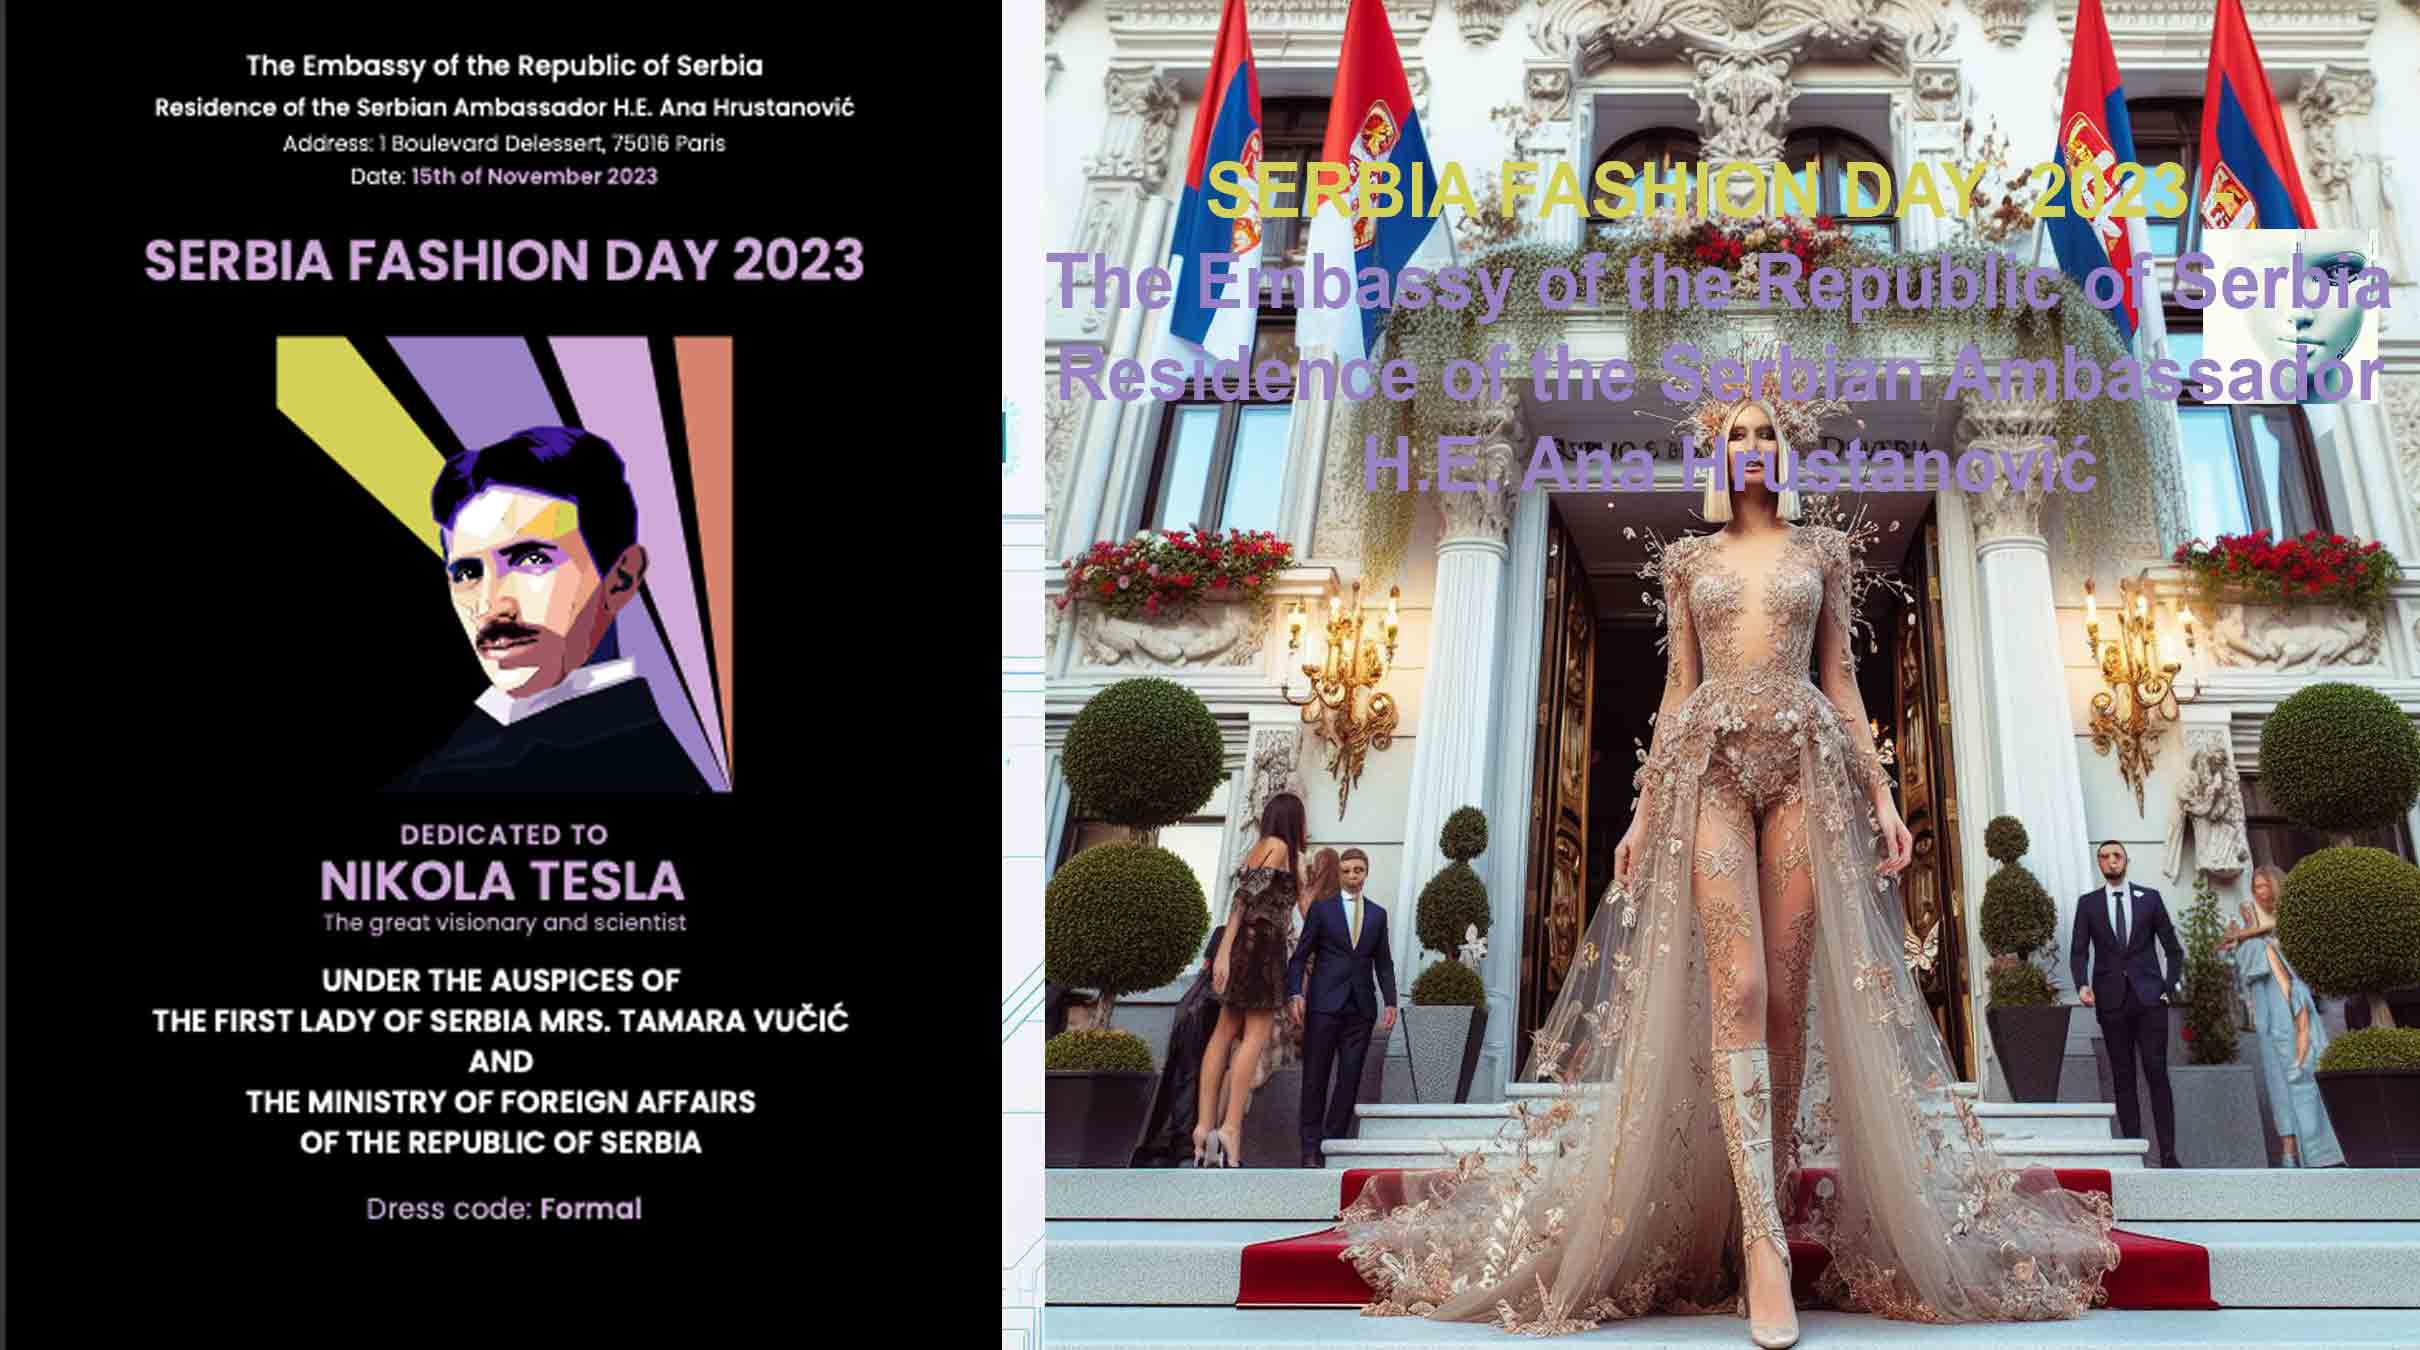 AFRICA-VOGUE-COVER-The-Embassy-of-the-Republic-of-Serbia-Residence-of-the-Serbian-Ambassador-H.E.-Ana-Hrustanović-DN-AFRICA-Media-Partner